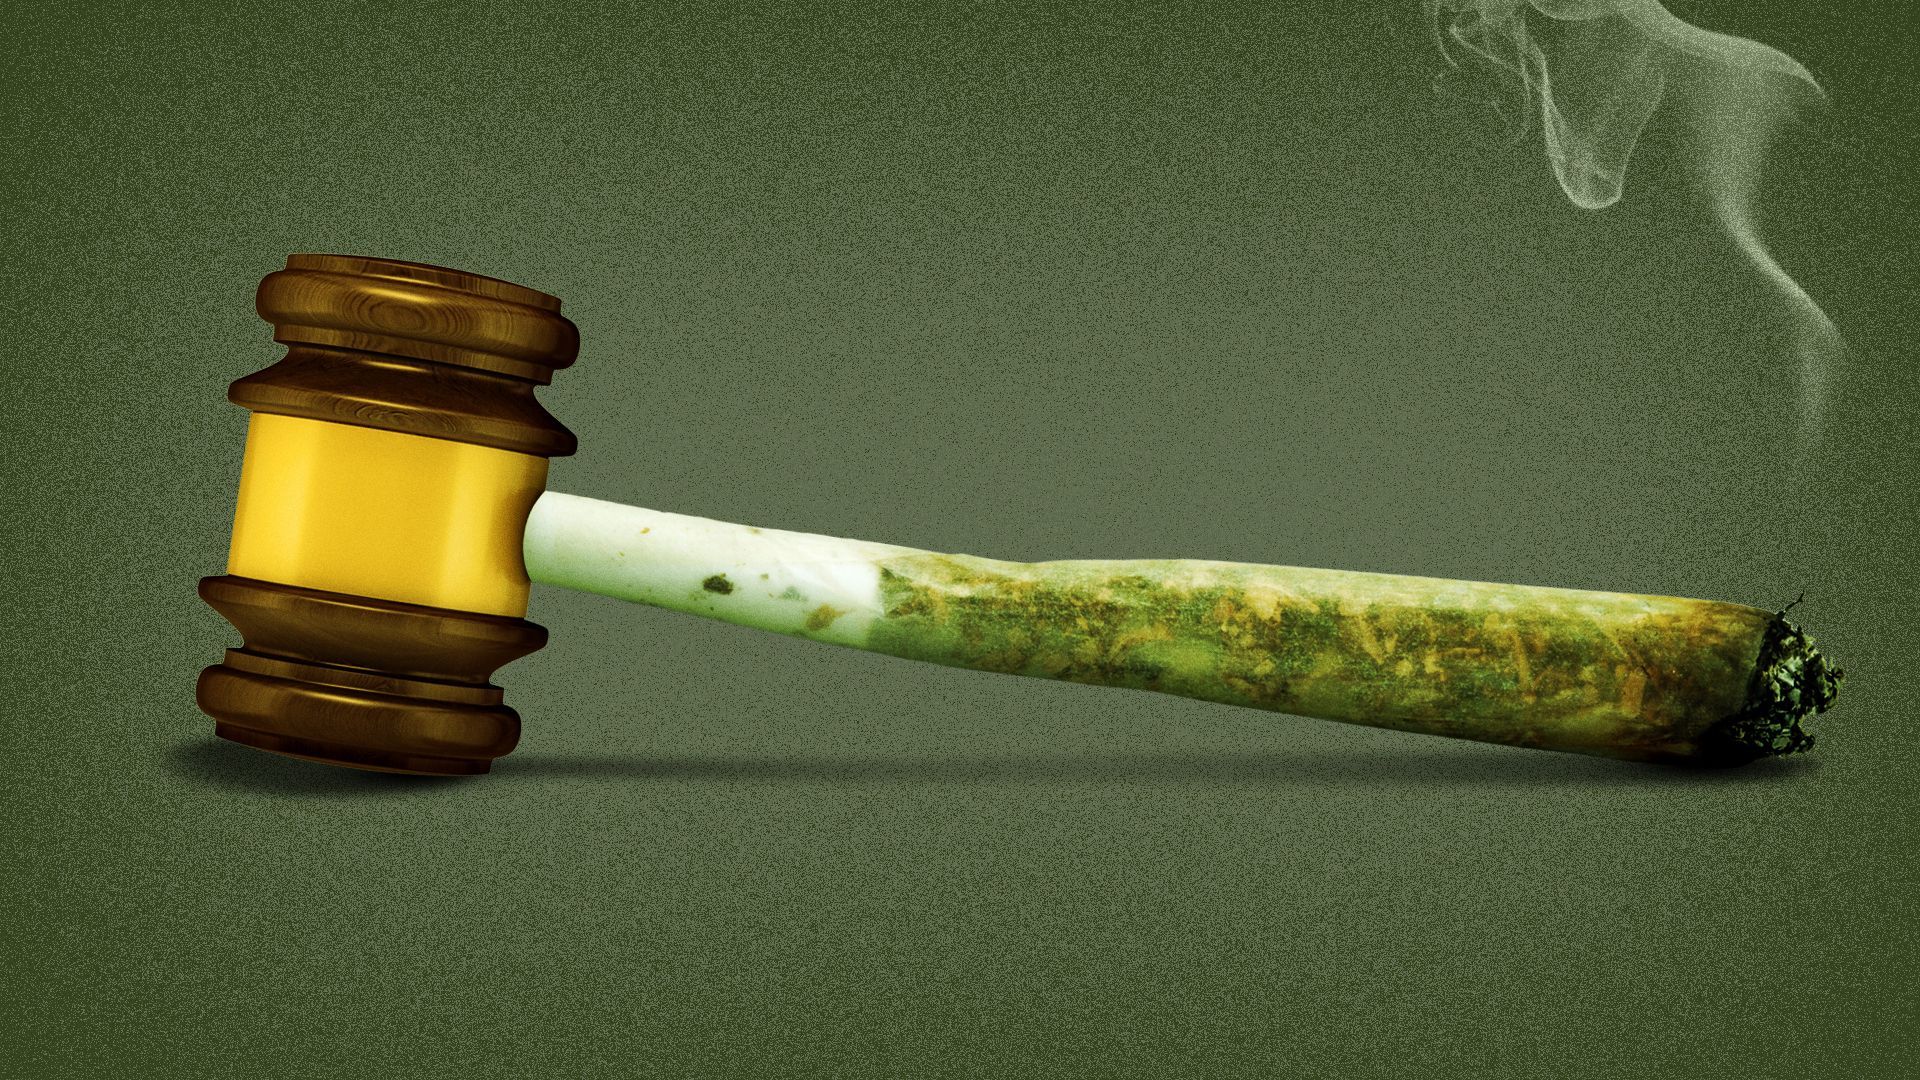 Illustration of a gavel, but the handle is a marijuana joint. 